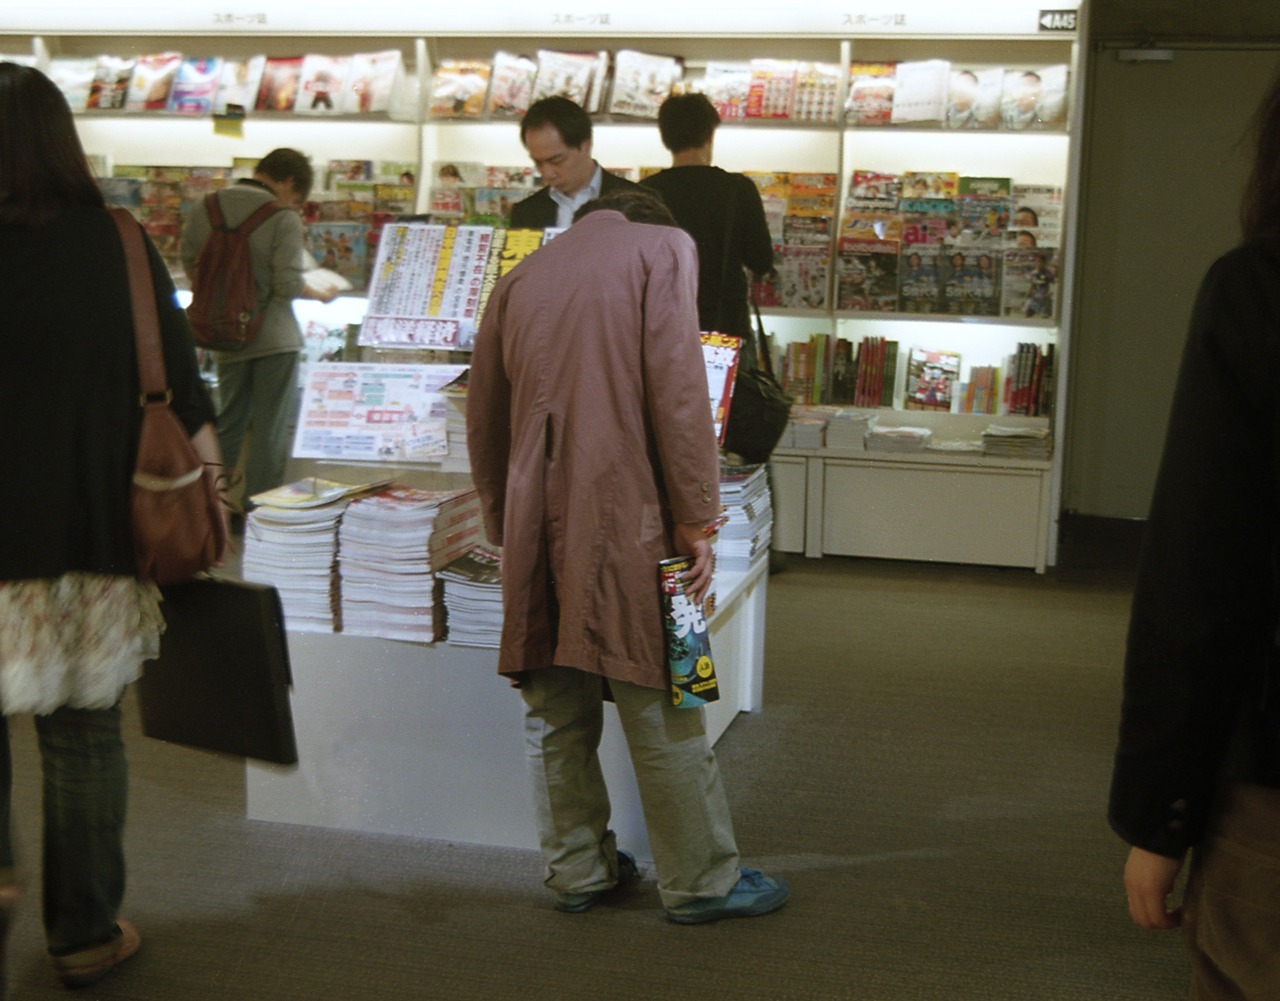 The artist is visiting a bookstore in Tokyo.